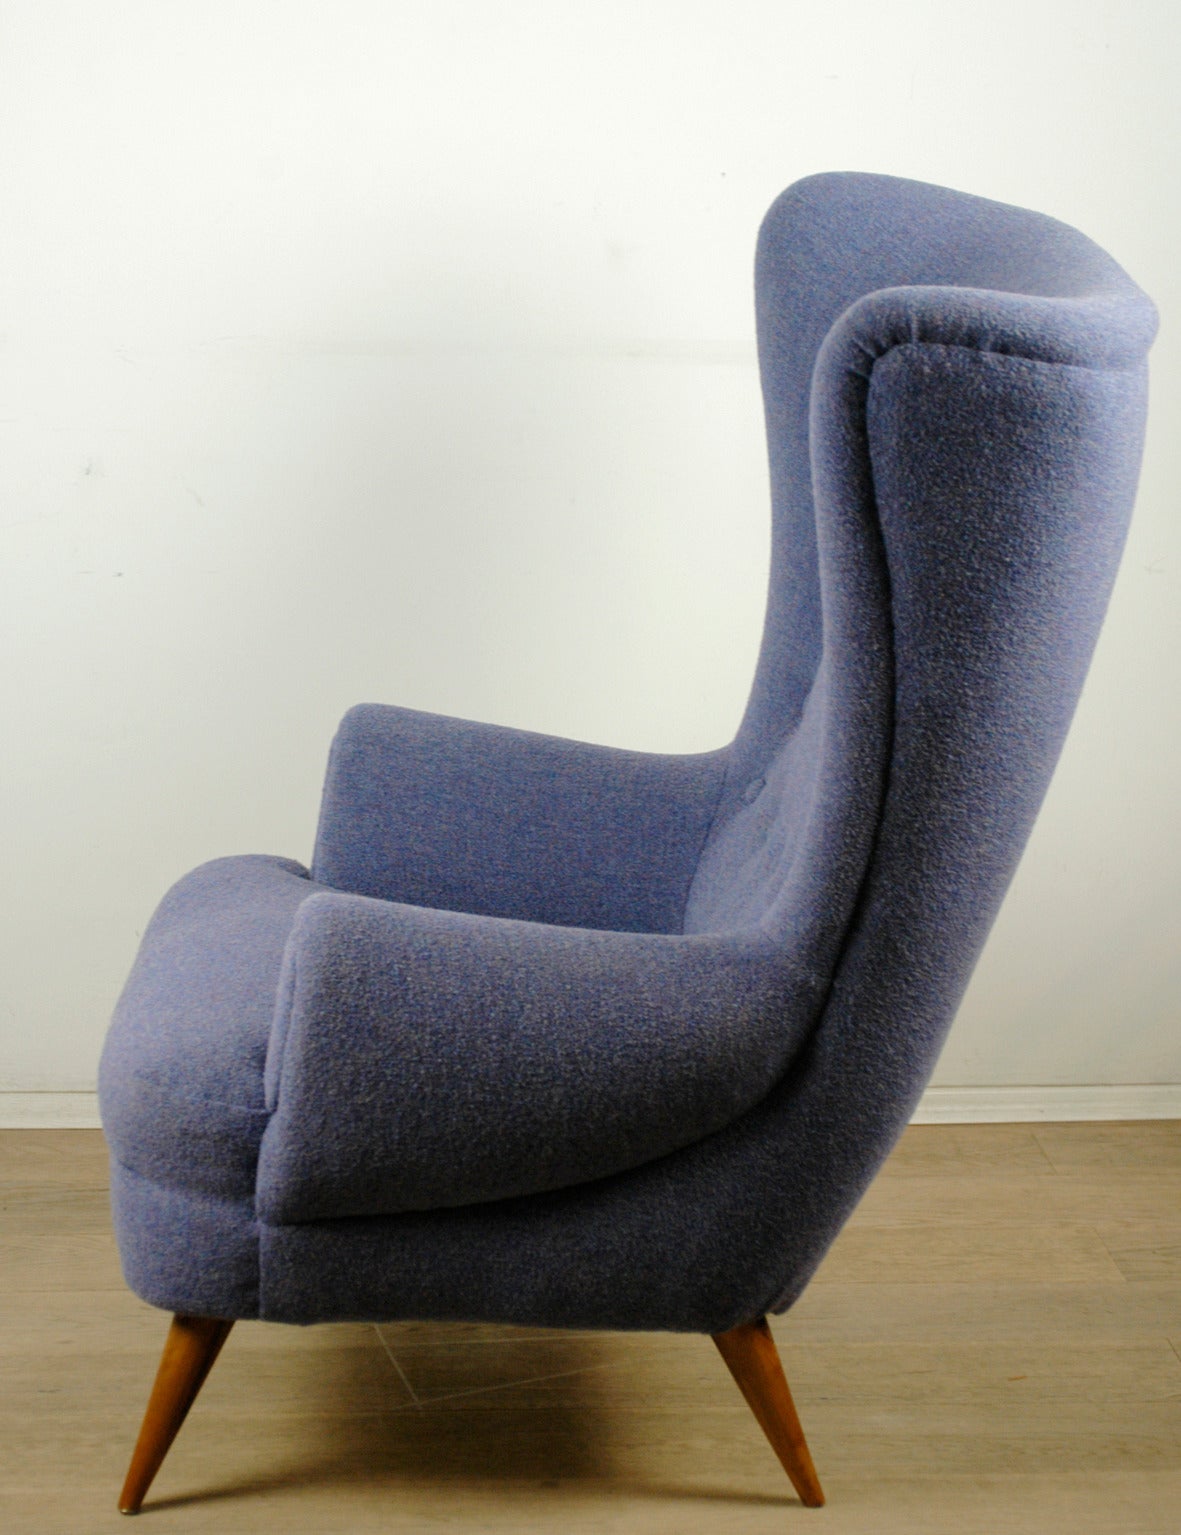 Amazing and comfortable Austrian 50s Lounge Chair designed by the Austrian Post War Architect Oskar Payer, Wooden Frame with Walnut Legs, completely restored and uoholstered with a new violet KVADRAT fabric.